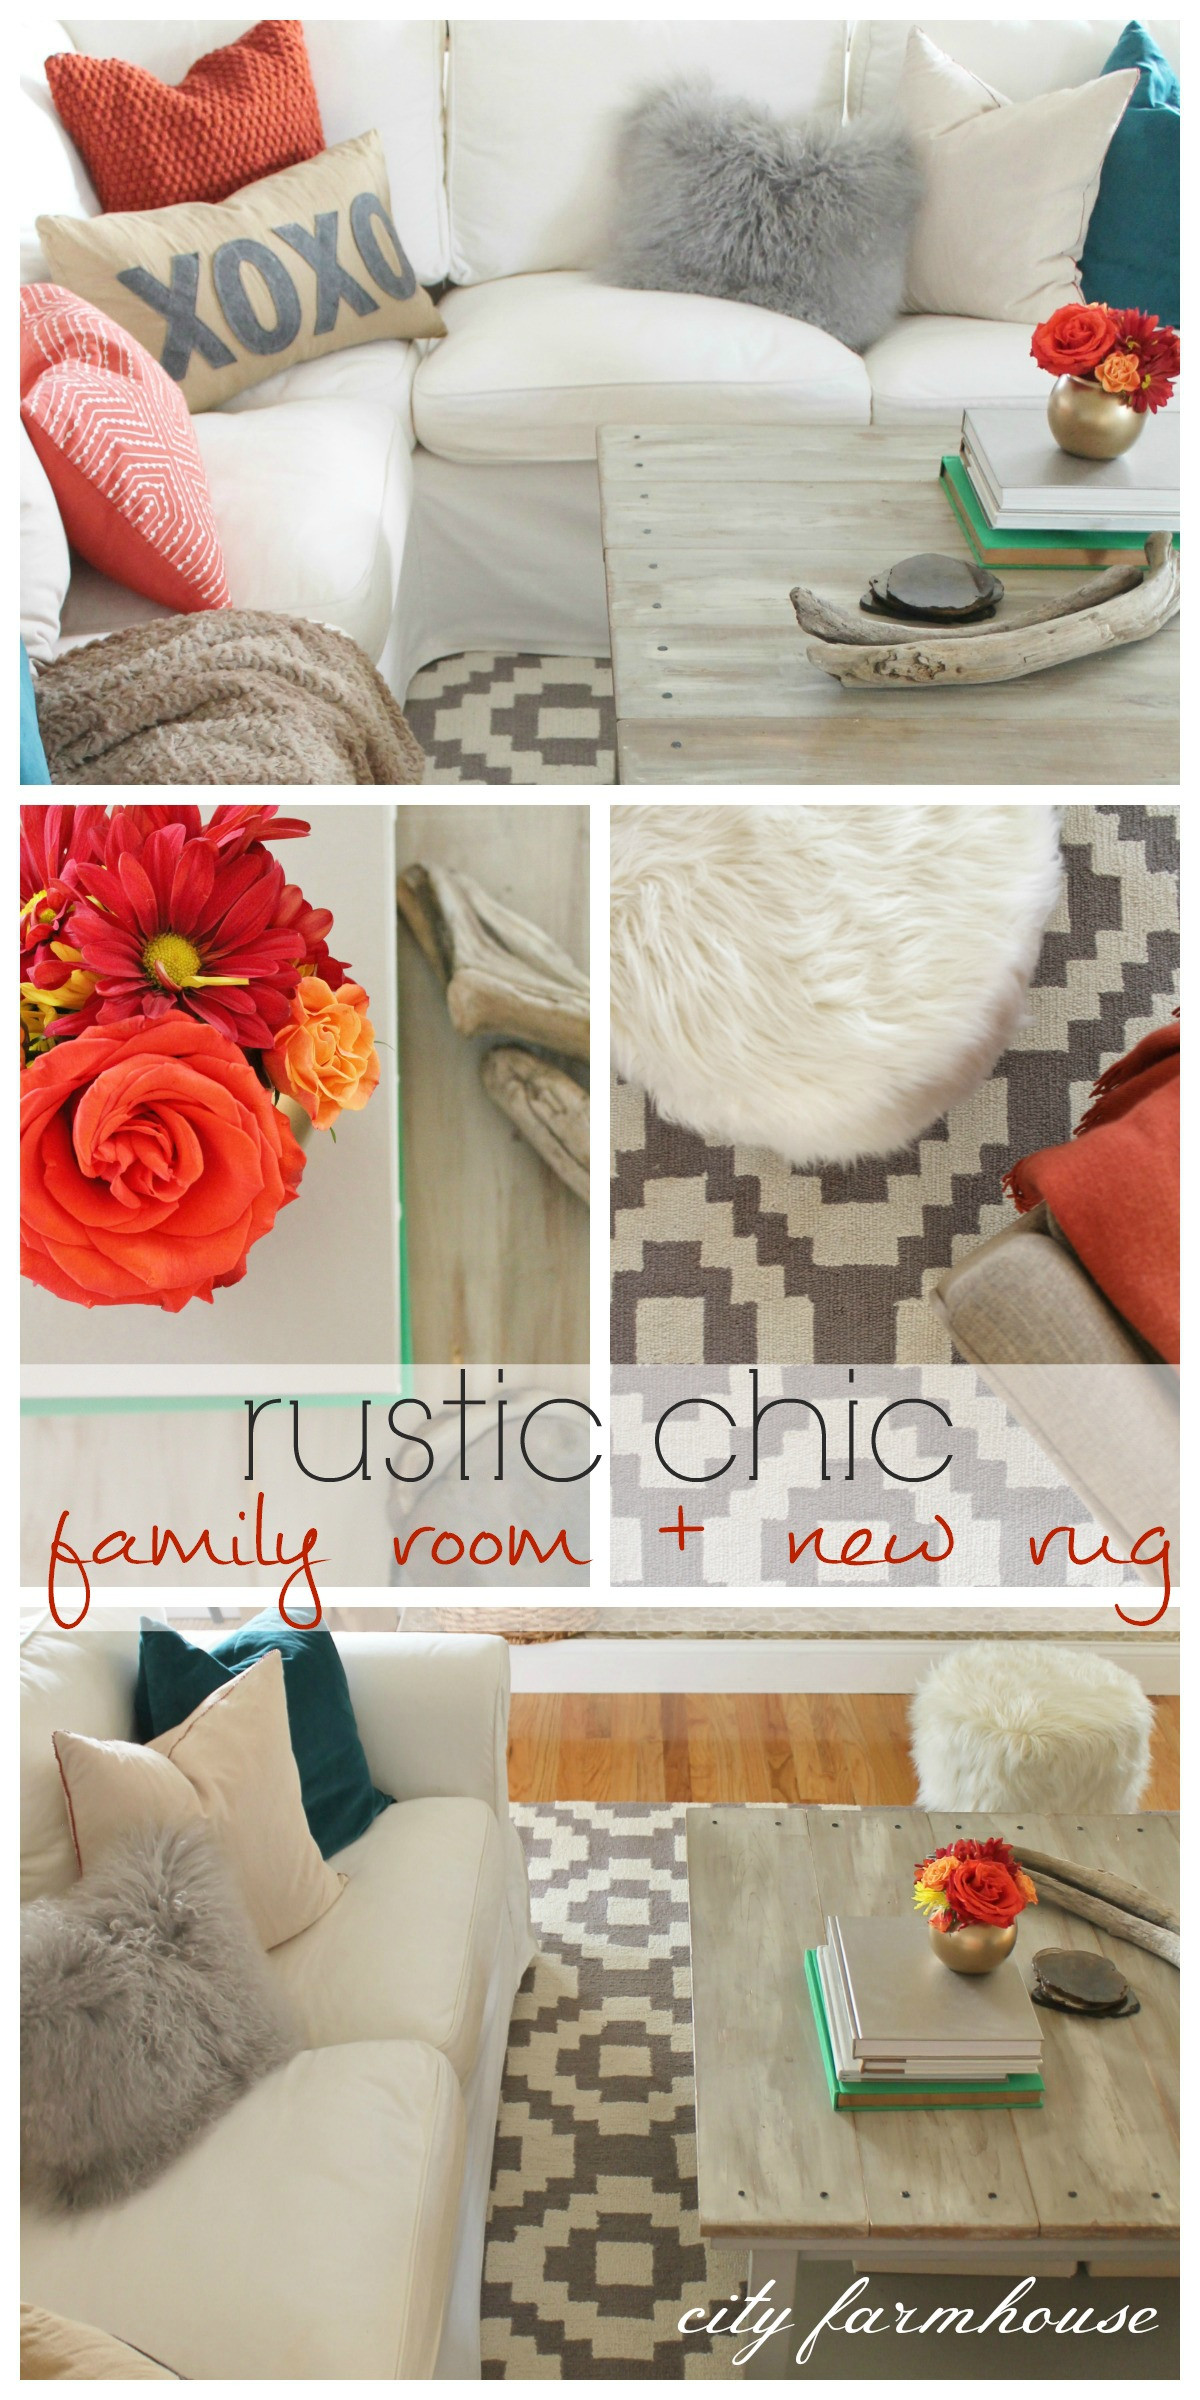 Rustic Rugs For Living Room
 Rustic Chic Family Room New Rug City Farmhouse